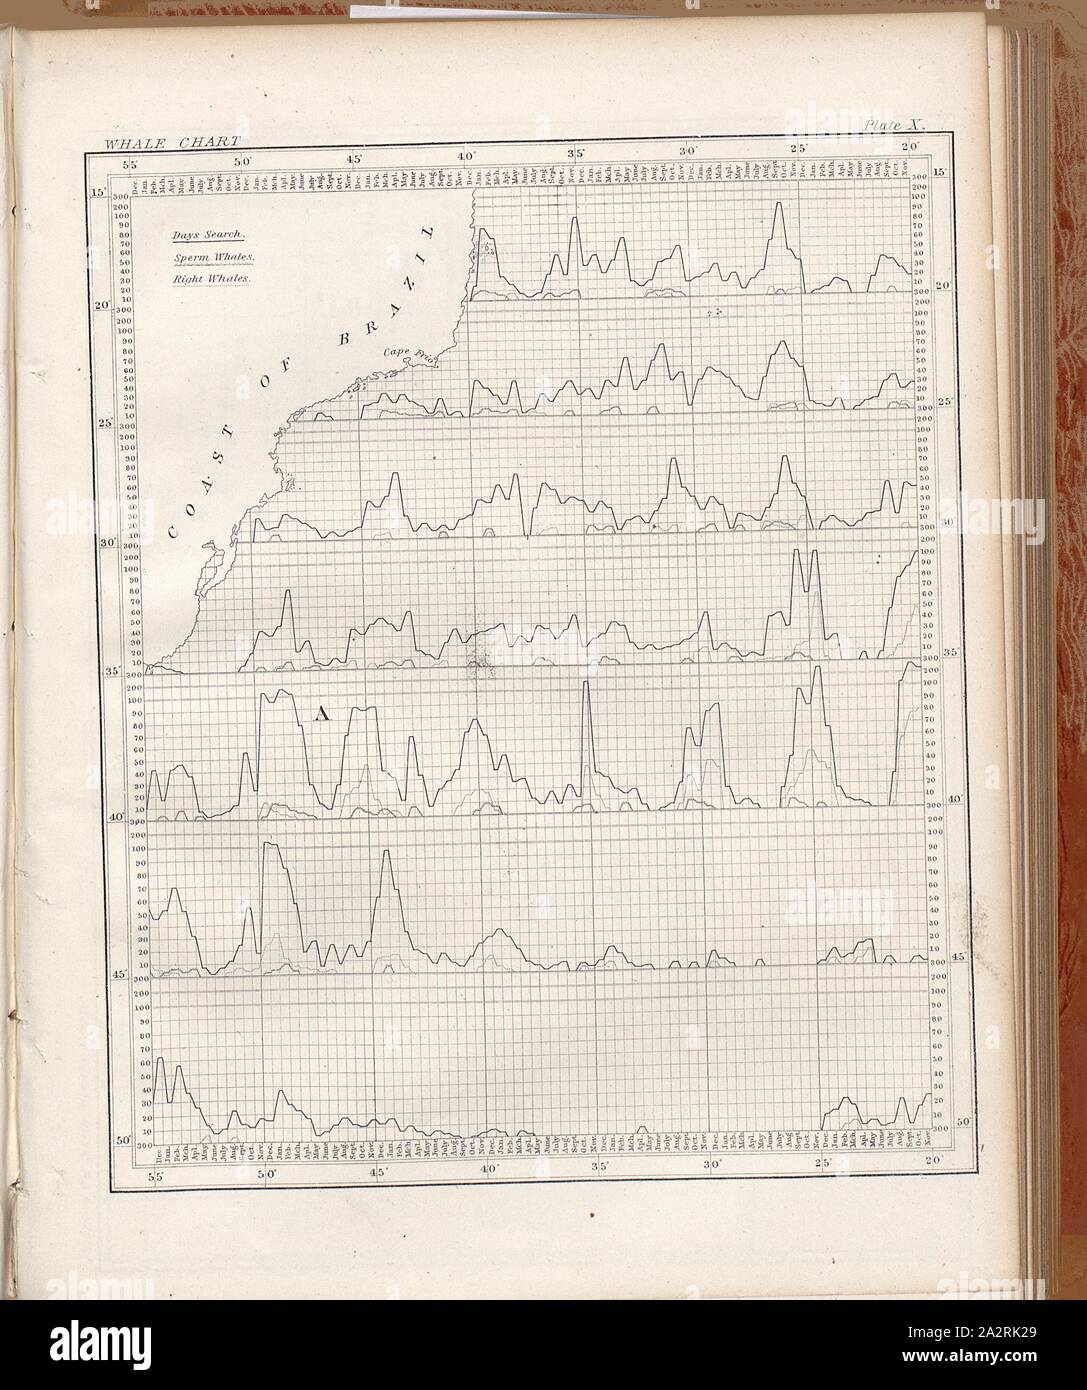 Whale Chart 1, Occurrence of sperm whales and right whales off the coast of Brazil, Pl. X, 1858, M. F. Maury: Sailing directions. Washington, [s.n.], 1858-1859 Stock Photo